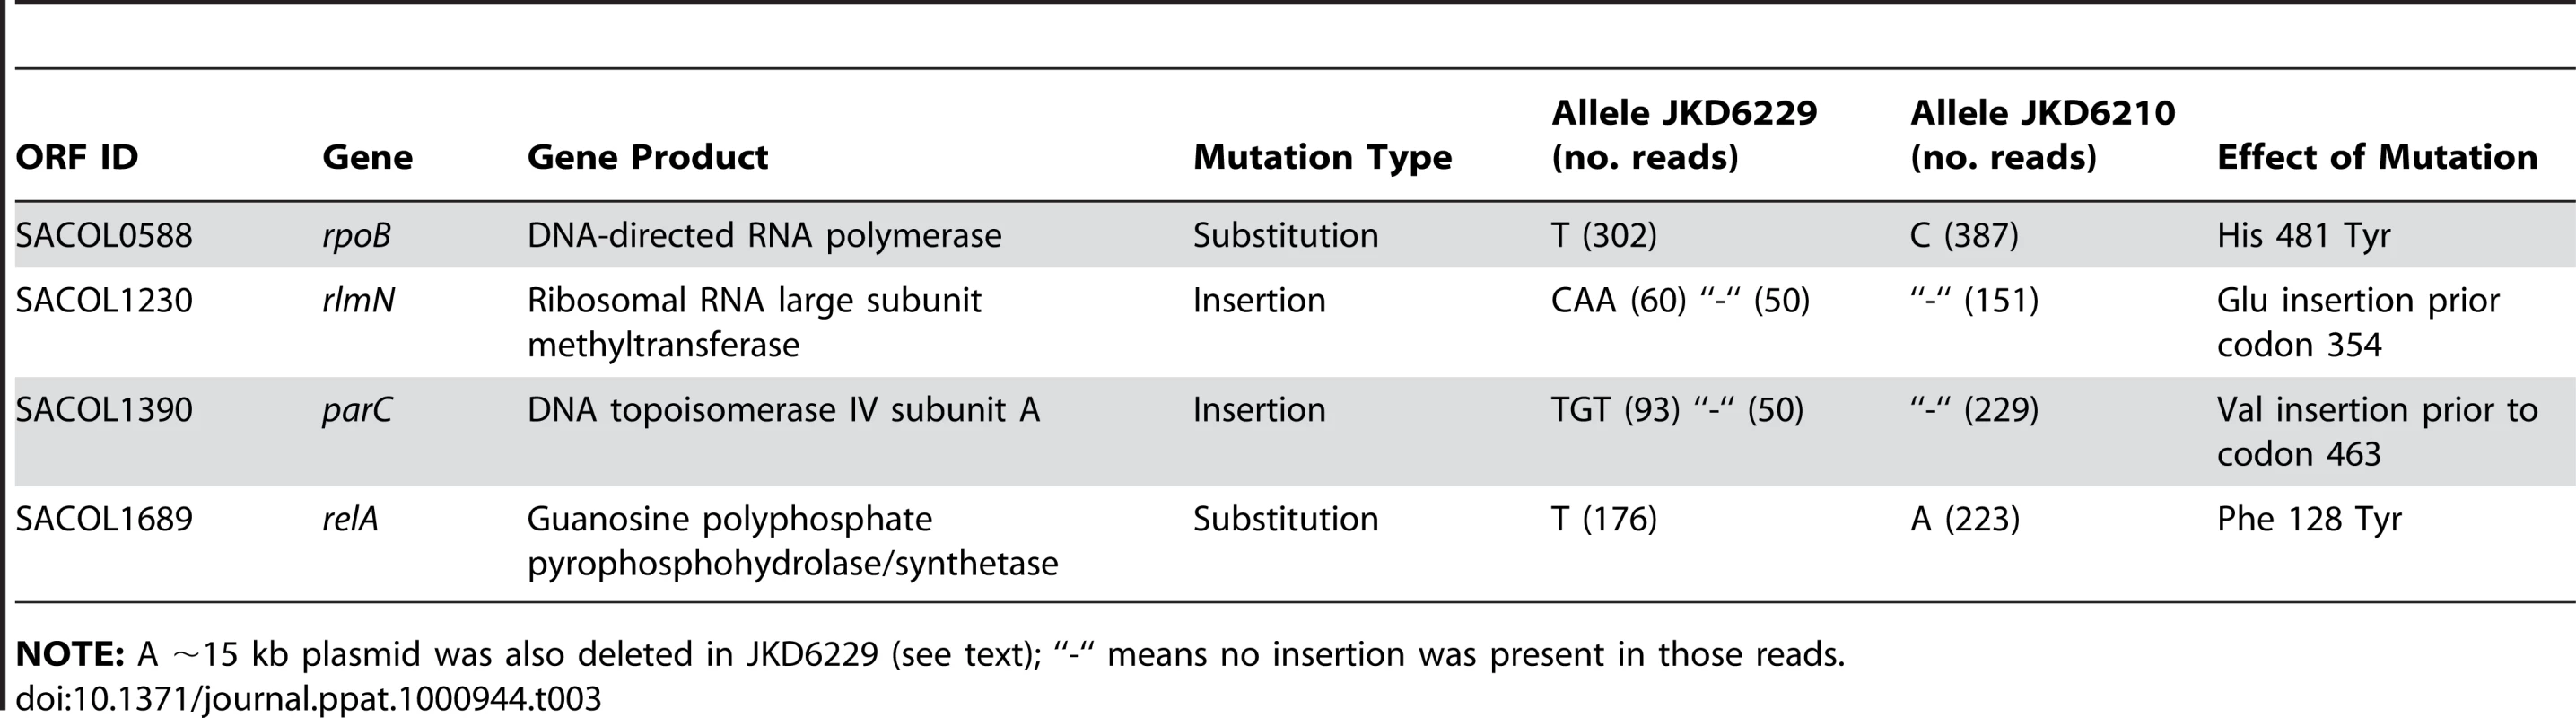 Summary of base substitutions and insertions detected in JKD6229 (small colony variant) compared to JKD6210 (methicillin-resistant <i>S. aureus</i>).